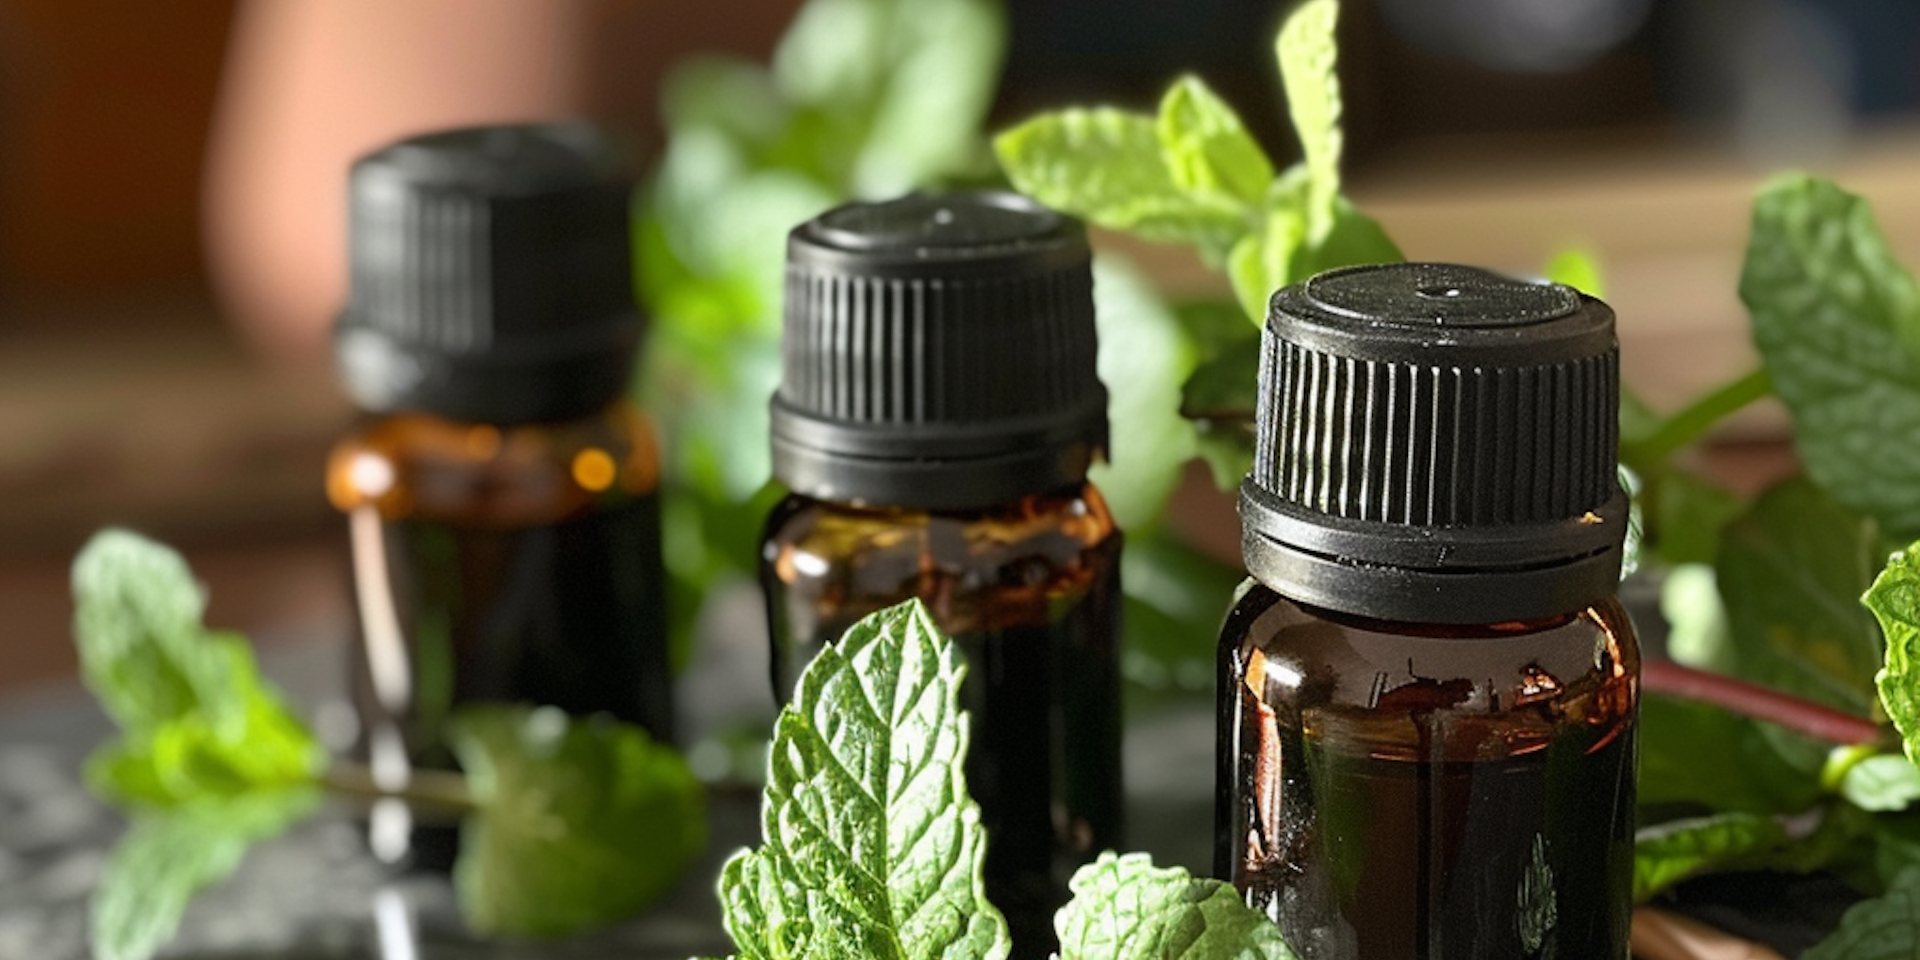 essential oils extracted from herbs are known to repel bugs